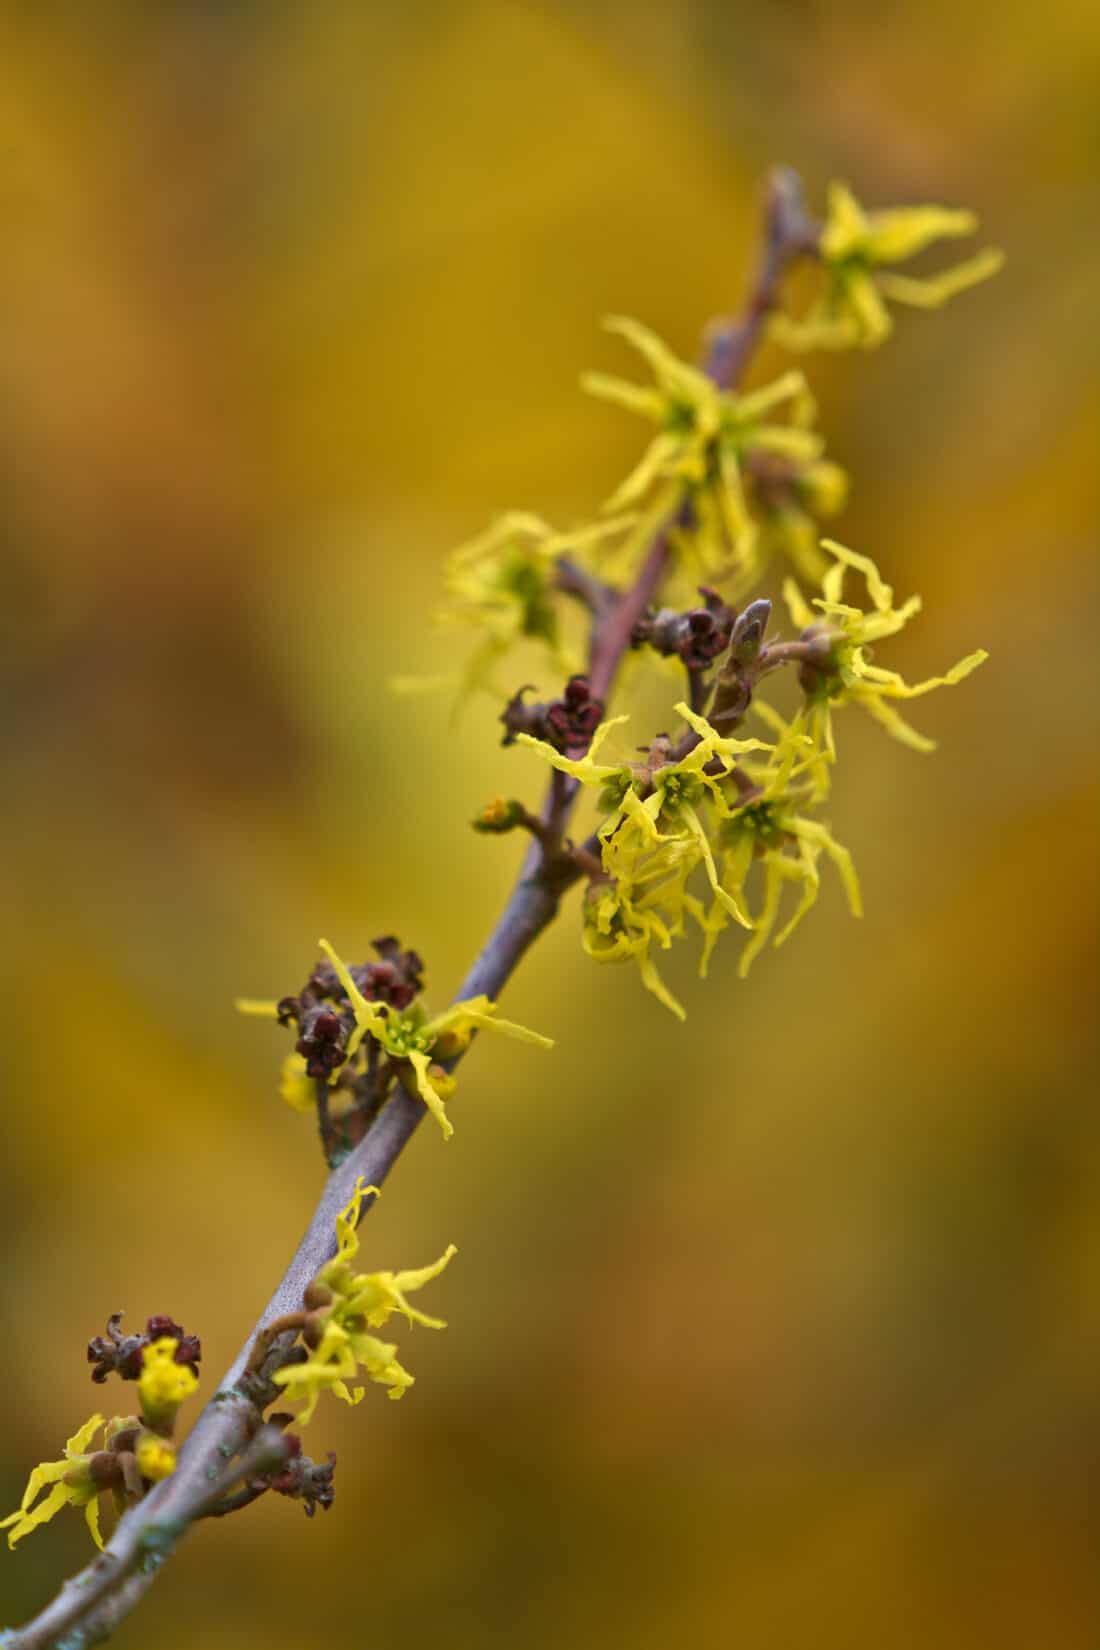 A close up of a yellow flower on a hamamelis virginiana branch.